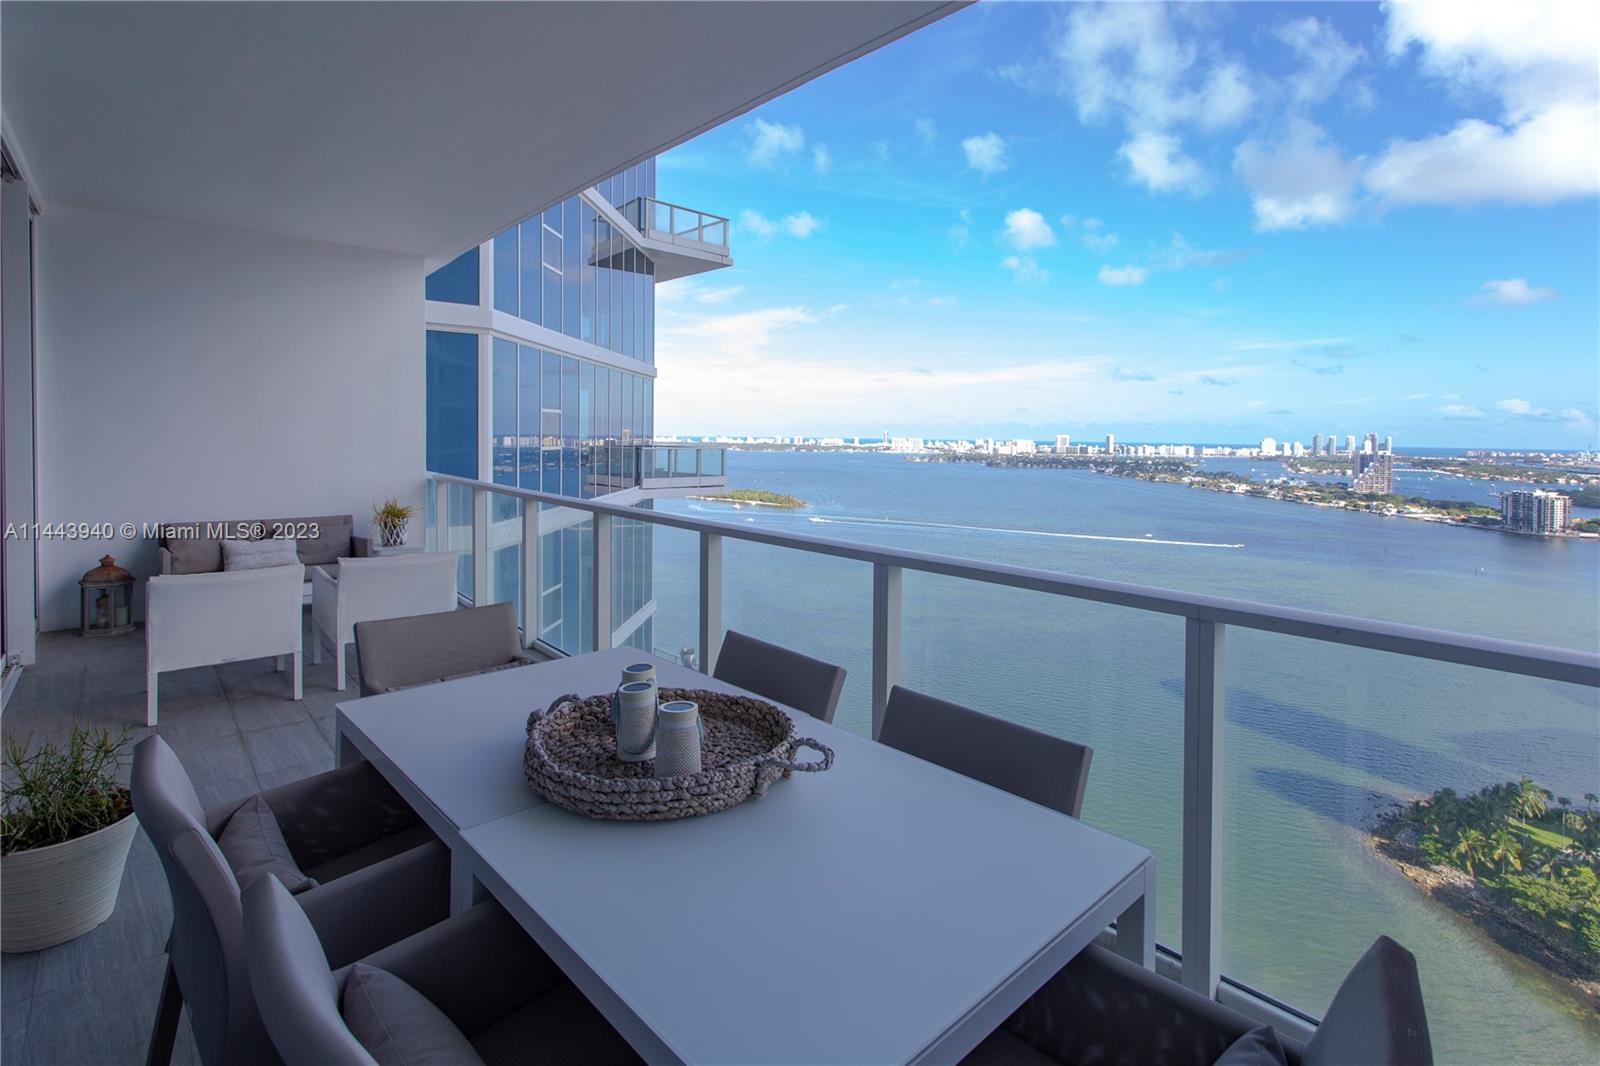 Stunning high end furnished unit overlooking the bay and the ocean with a 10 foot deep balcony! Private Elevator, private foyer, spacious 3 bedrooms and 3 bathrooms, open kitchen with large island, floor to ceiling high impact windows, custom electric blinds throughout the unit, walk in closet, top of the line appliances. Additional features include 10 ft ceiling through out and separate laundry room. The Paramount Bay is designed by Arquitectonica and Lenny Kravitz, is one of the most stylish and upscale buildings in Miami with 5 star amenities such as Sunrise and Sunset pool, two story health and wellness facility with professionally staff, kids room and teens rooms, party room with chef's kitchen and catering kitchen, meeting room and library.